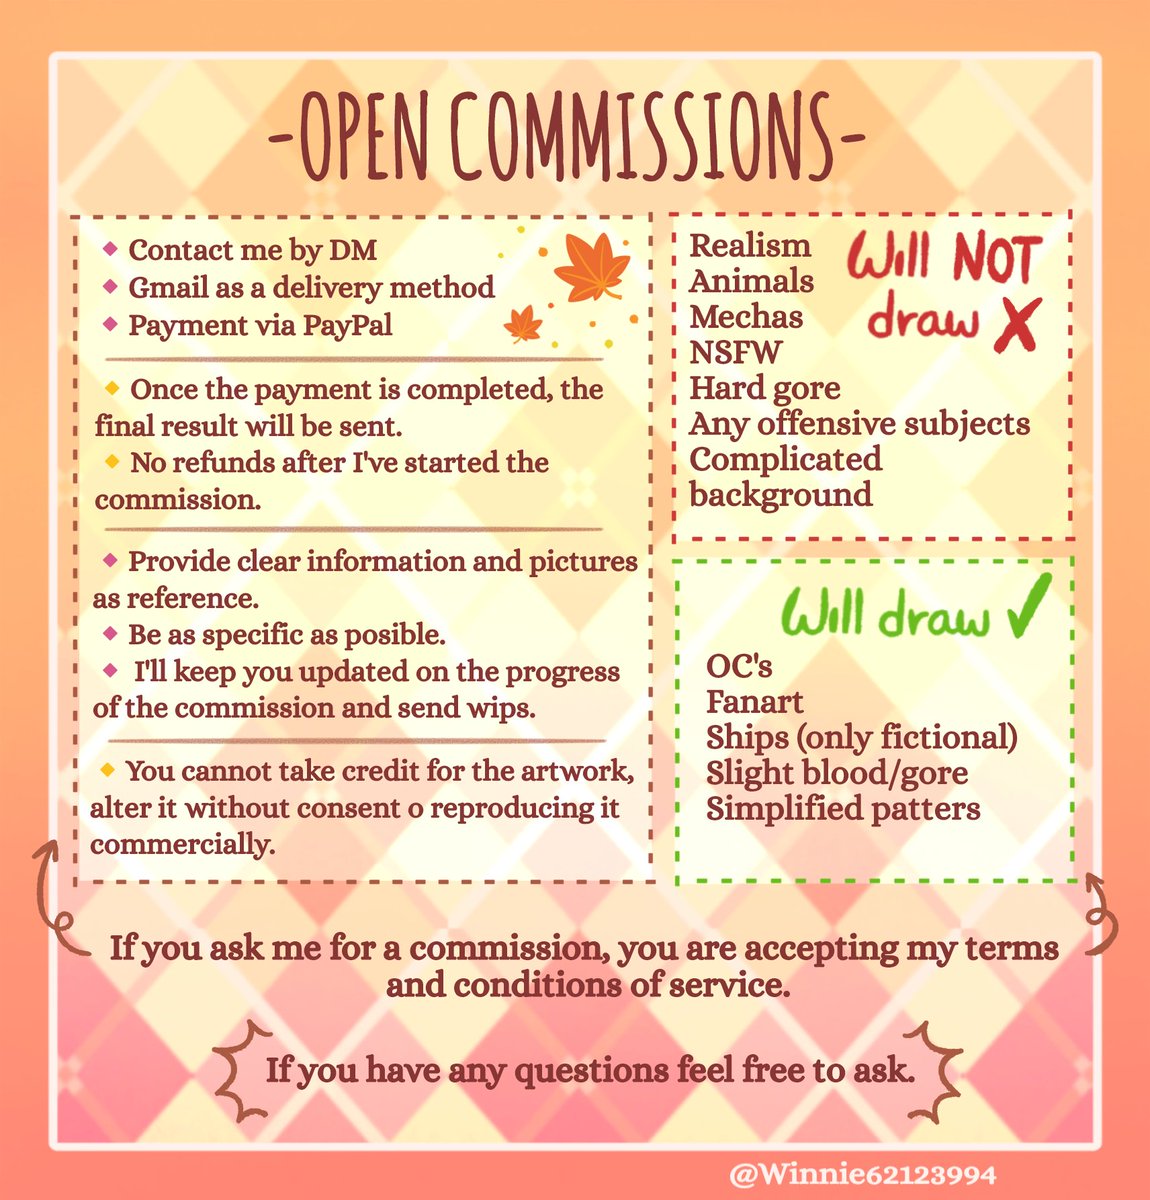 🌟O P E N    C O M M I S S I O N S🌟

🌺Open 5 slots
🌺Info in the images below ^^
🌺RT's are really appreciated!
#commissionsopen #Commission #digitalart 